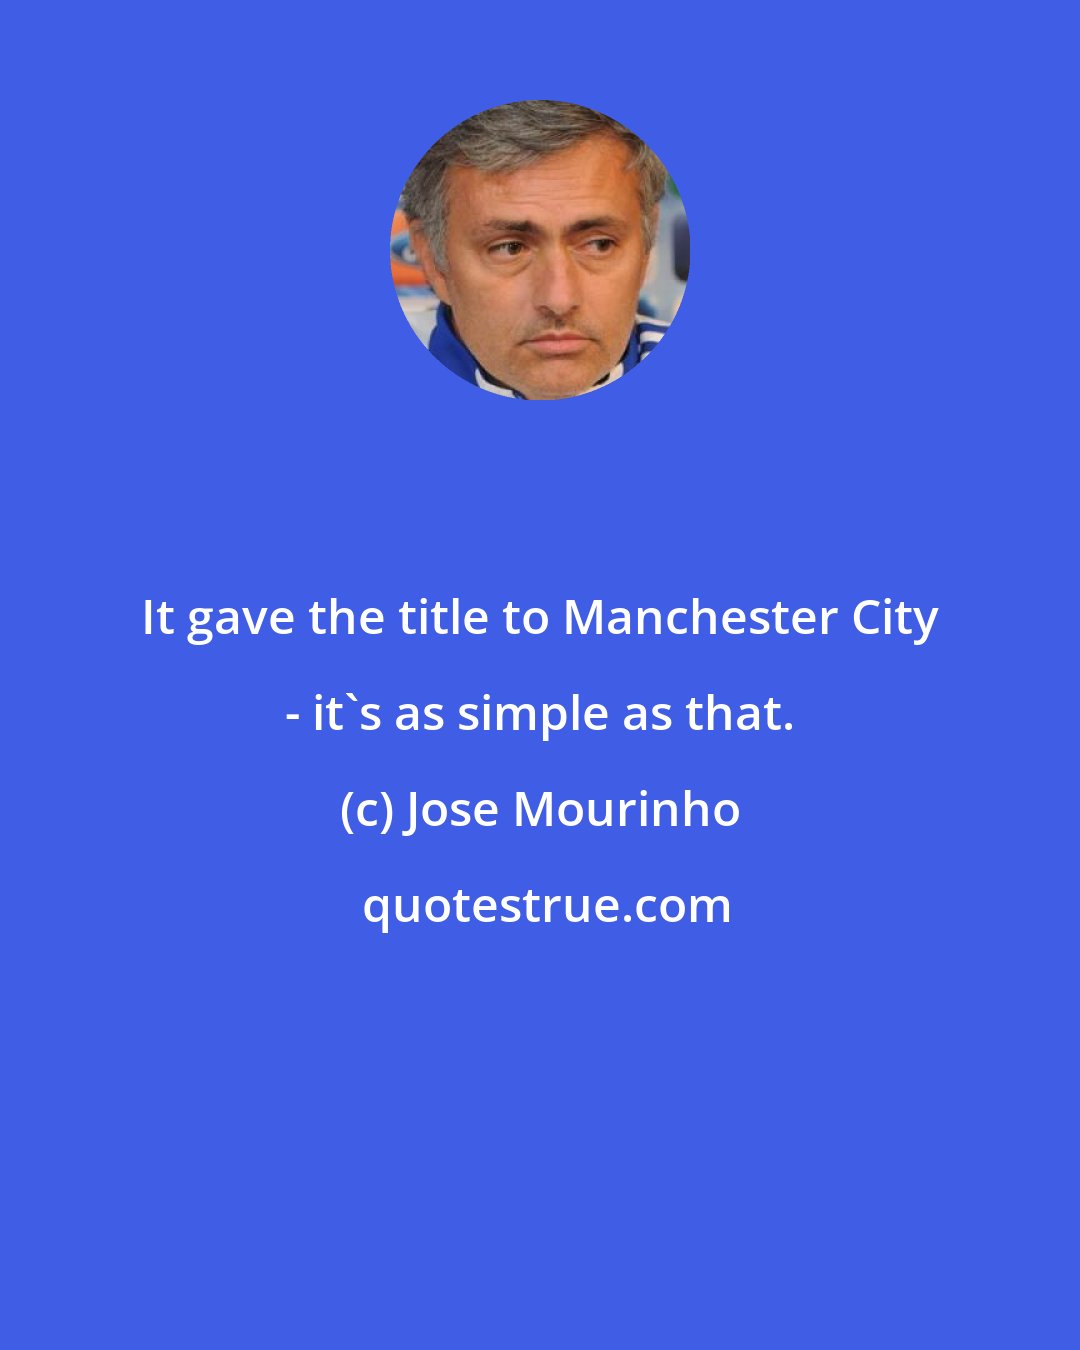 Jose Mourinho: It gave the title to Manchester City - it's as simple as that.